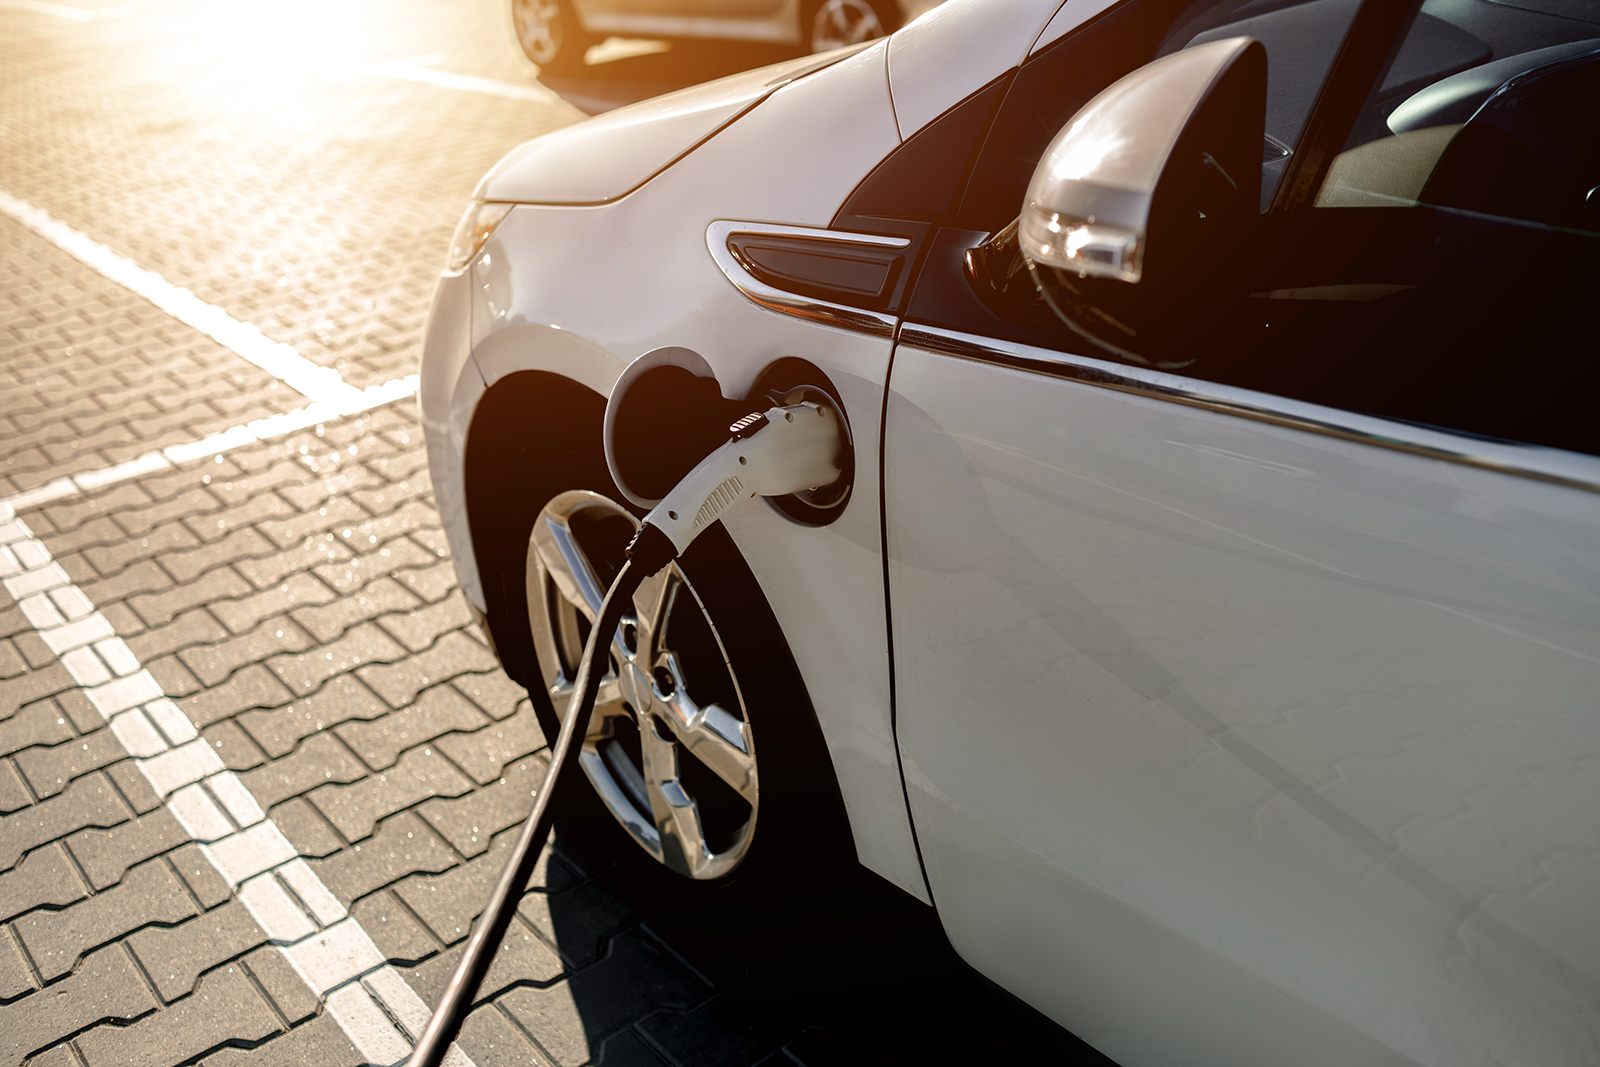 The idea is to use a connected fleet of electric vehicles to transport power from generators to consumers equipped with bidirectional charging interfaces.